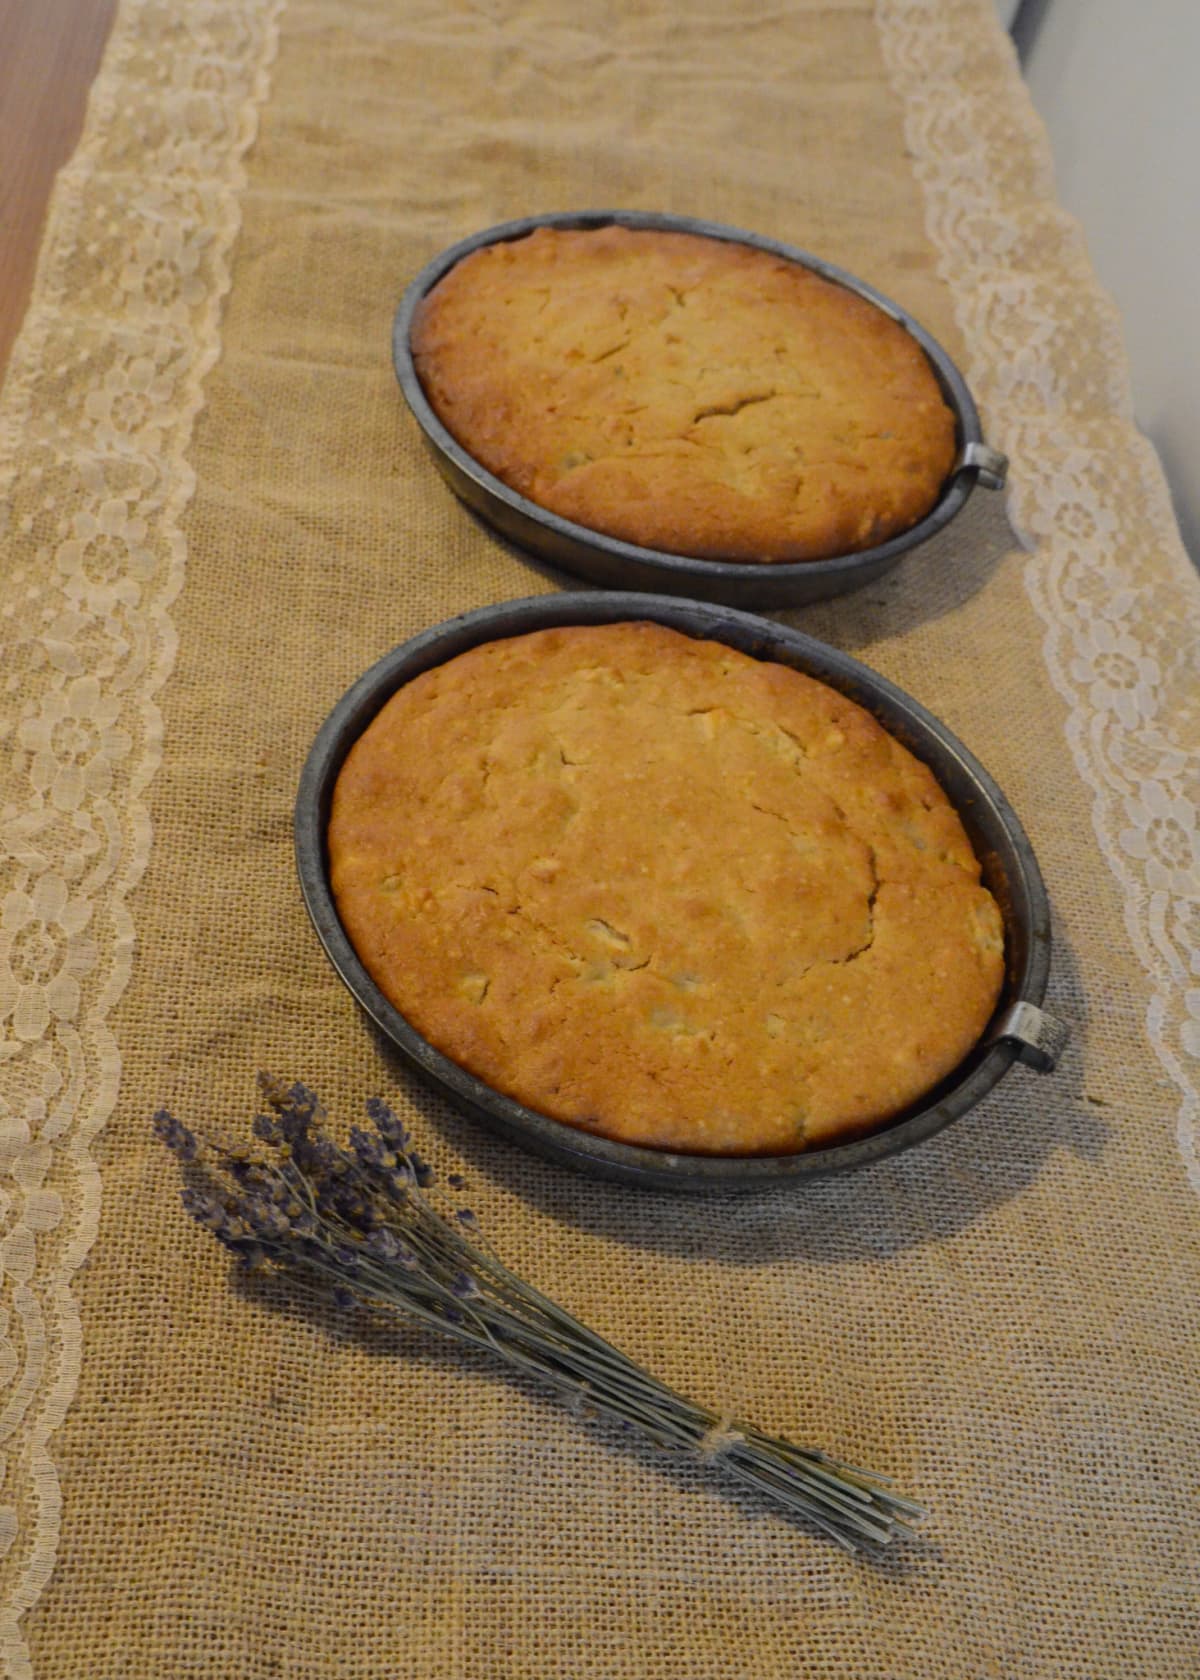 Sponge cakes in tin pans on a table